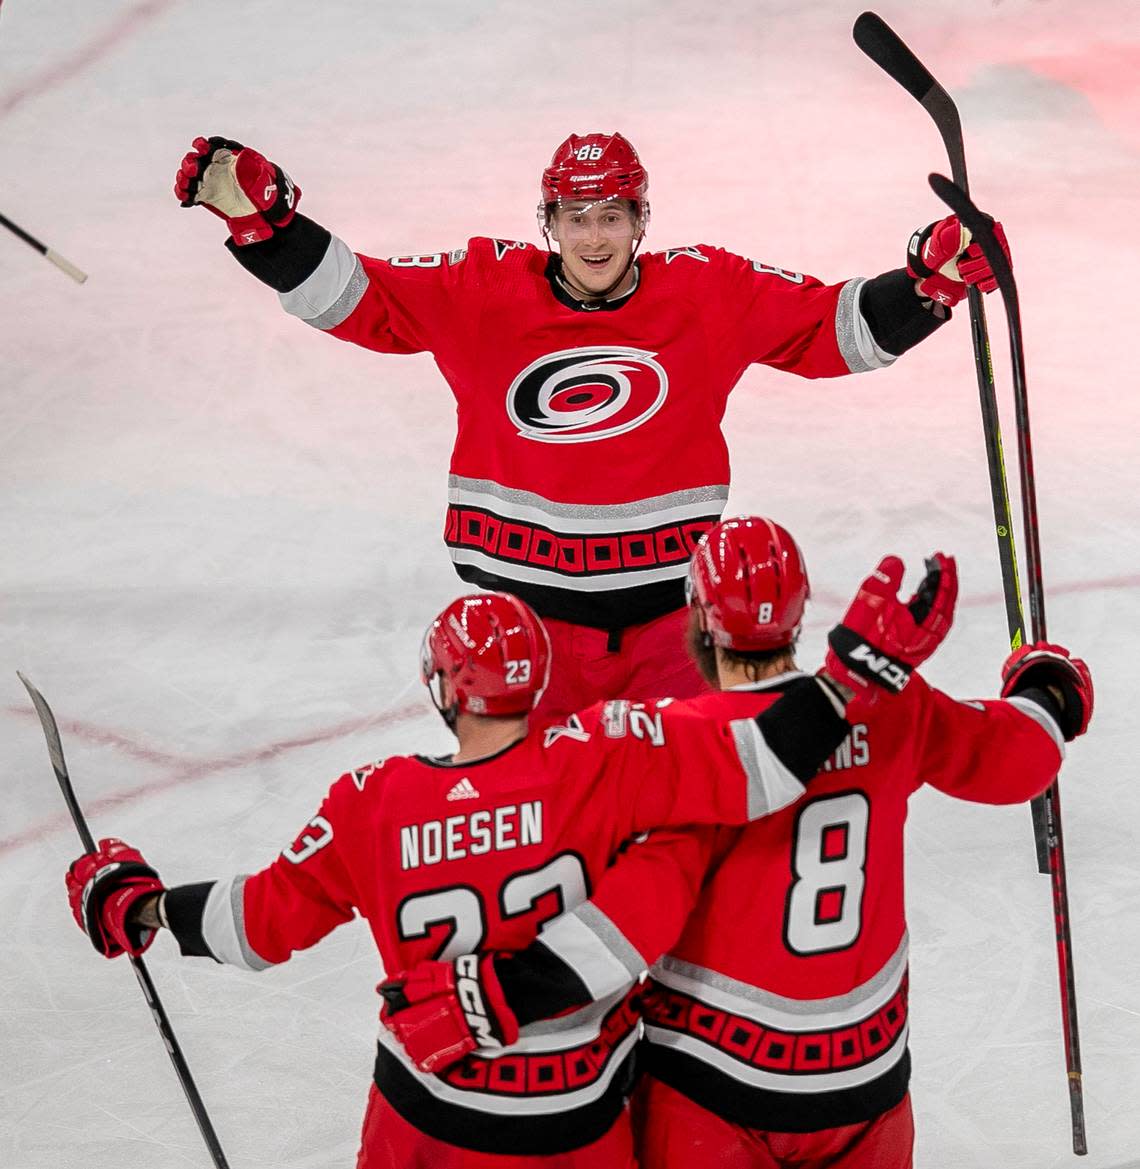 Carolina Hurricanes’ Stefan Noesen (23) celebrates with Brent Burns (8) and Martin Necas (88) after scoring in the second period to take a 2-0 lead during Game 2 of their Stanley Cup series on Wednesday, April 19, 2023 at PNC Arena in Raleigh, N.C.